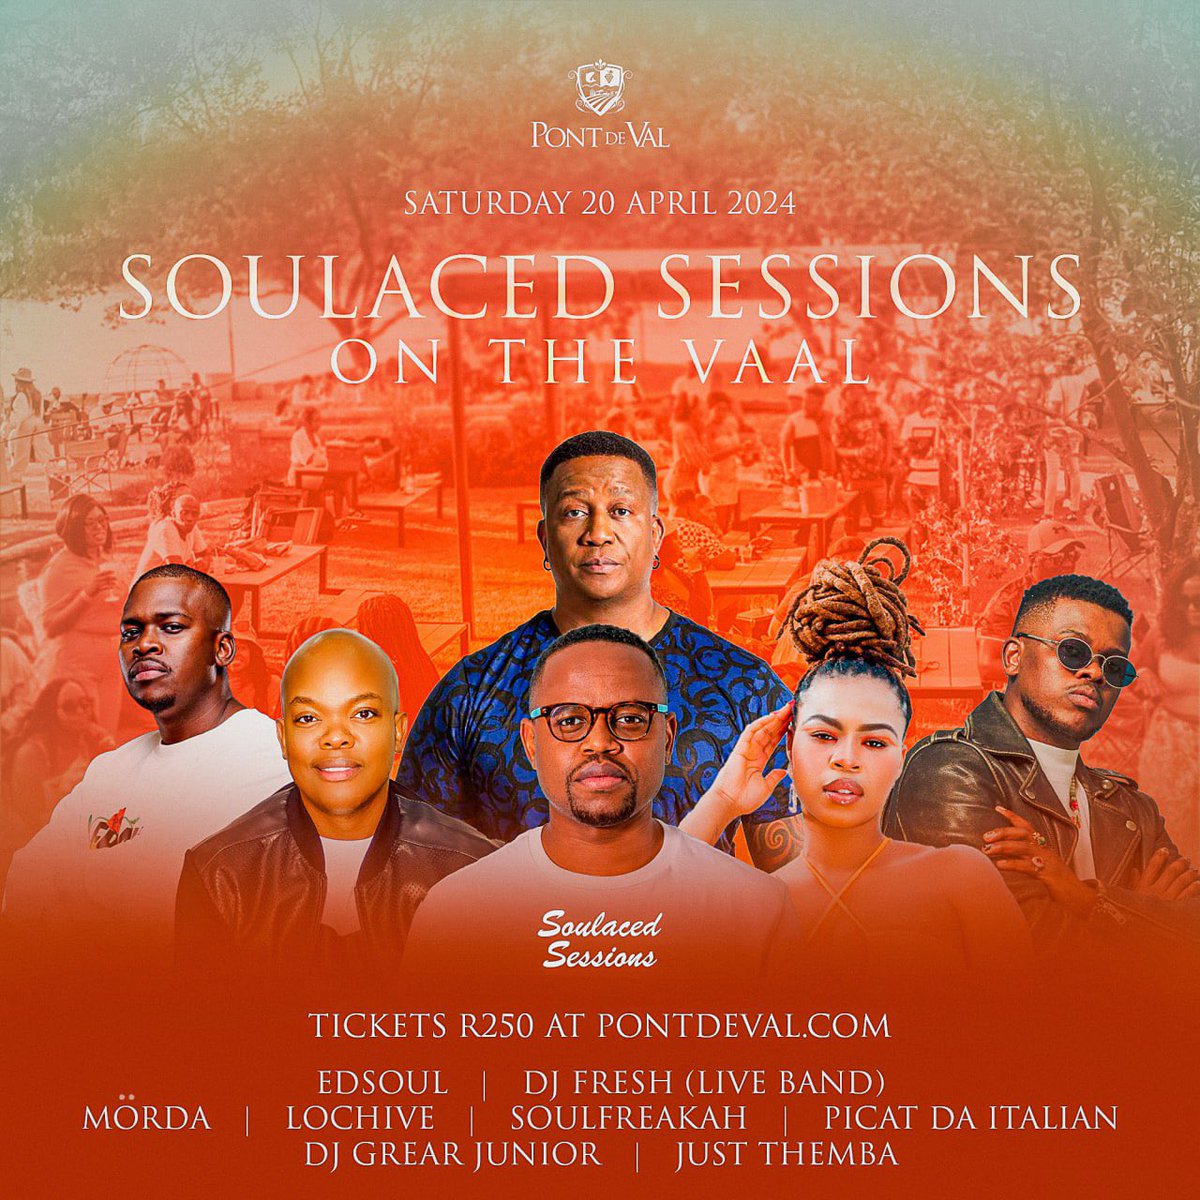 2 Days to go to @soulacedsession 🔥🔥 Music by @DJFreshSA Mörda @LochiveDJ @Soulfreakah @PicatDaItalian Just Themba DJ Grear Junior 🎫 Tickets are still available at pontdeval.com/product/soulac… See you there!!